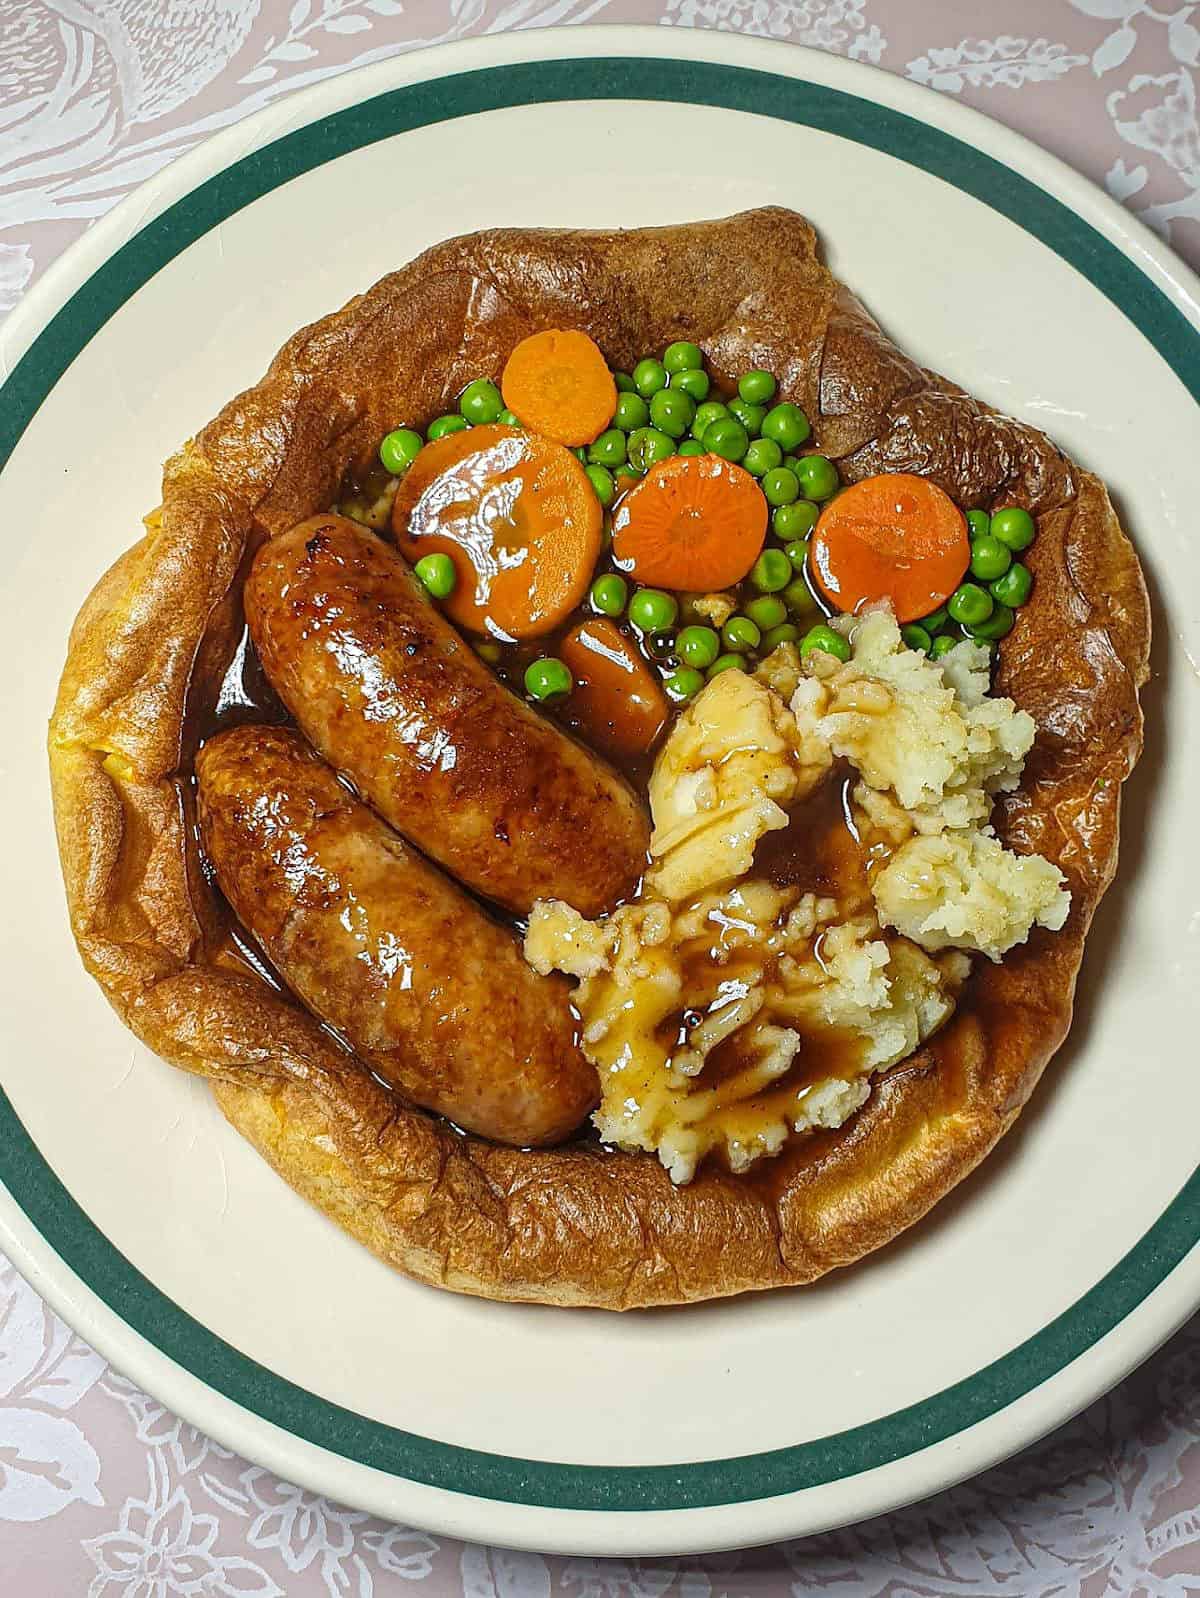  Yorkshire pudding, the must-have ingredient